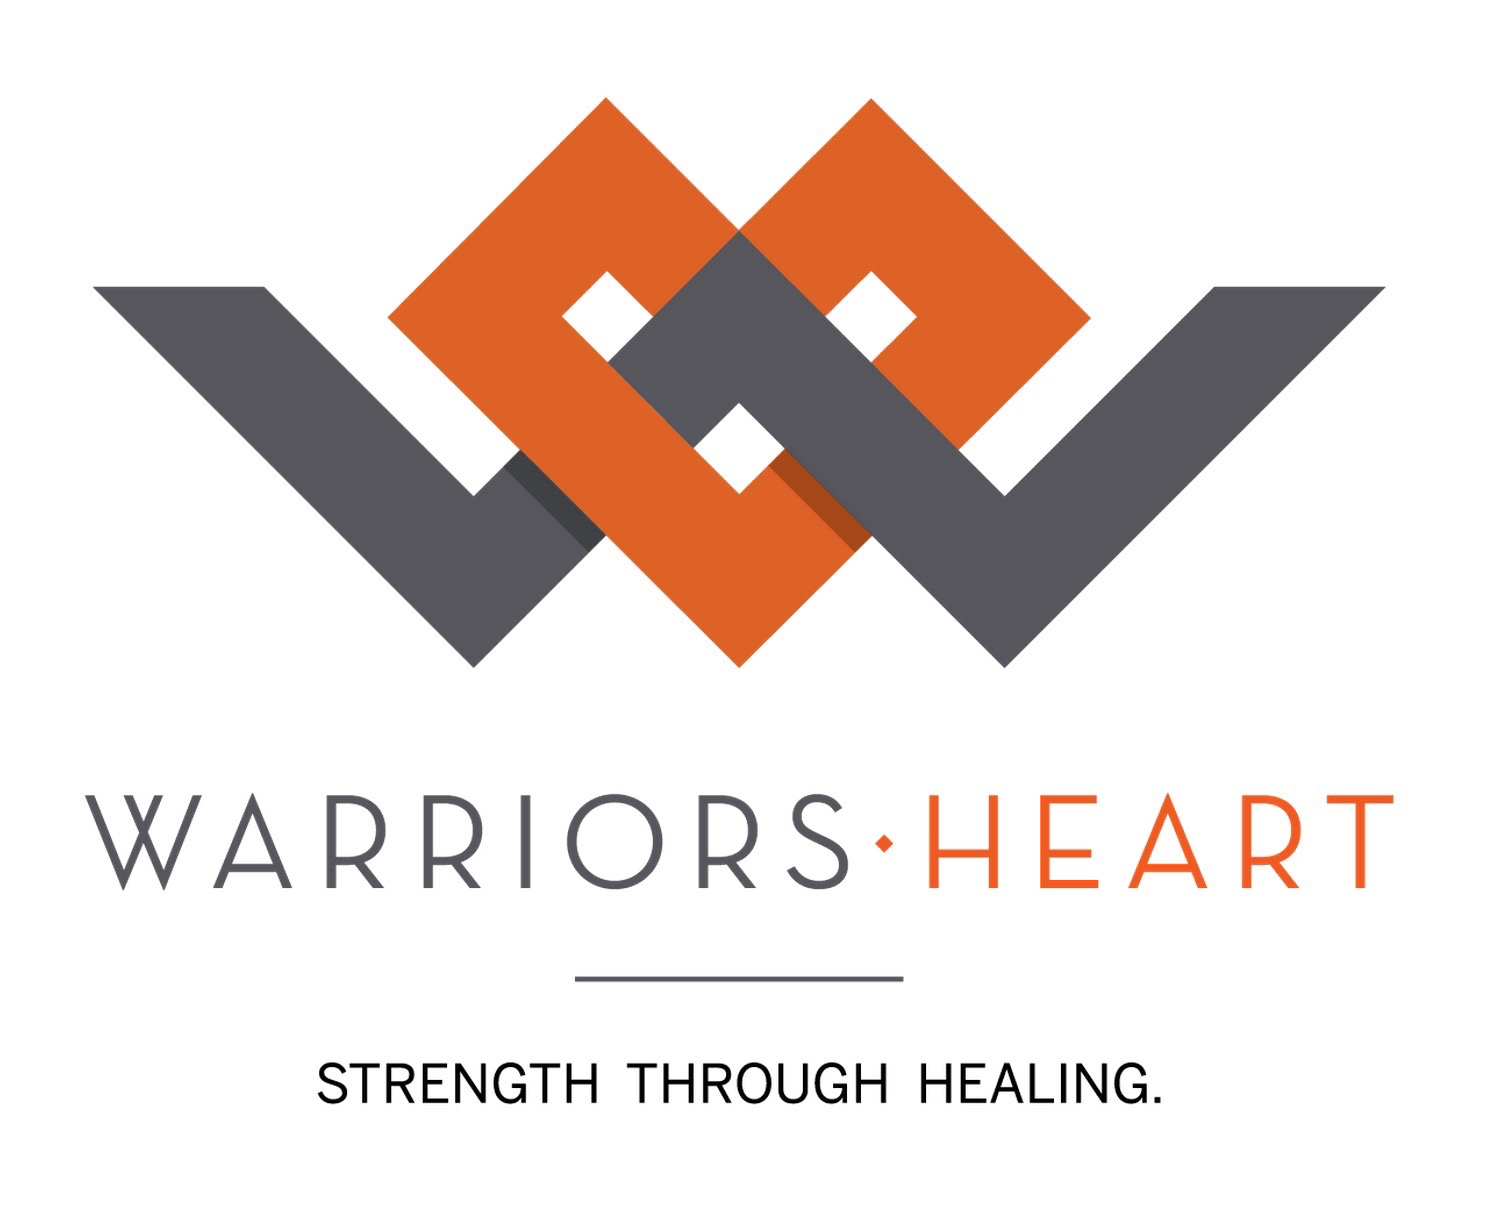 Warriors Heart is changing the narrative with their "Strength Through Healing" programs that are rebuilding lives for "Sober, Confident Warriors"